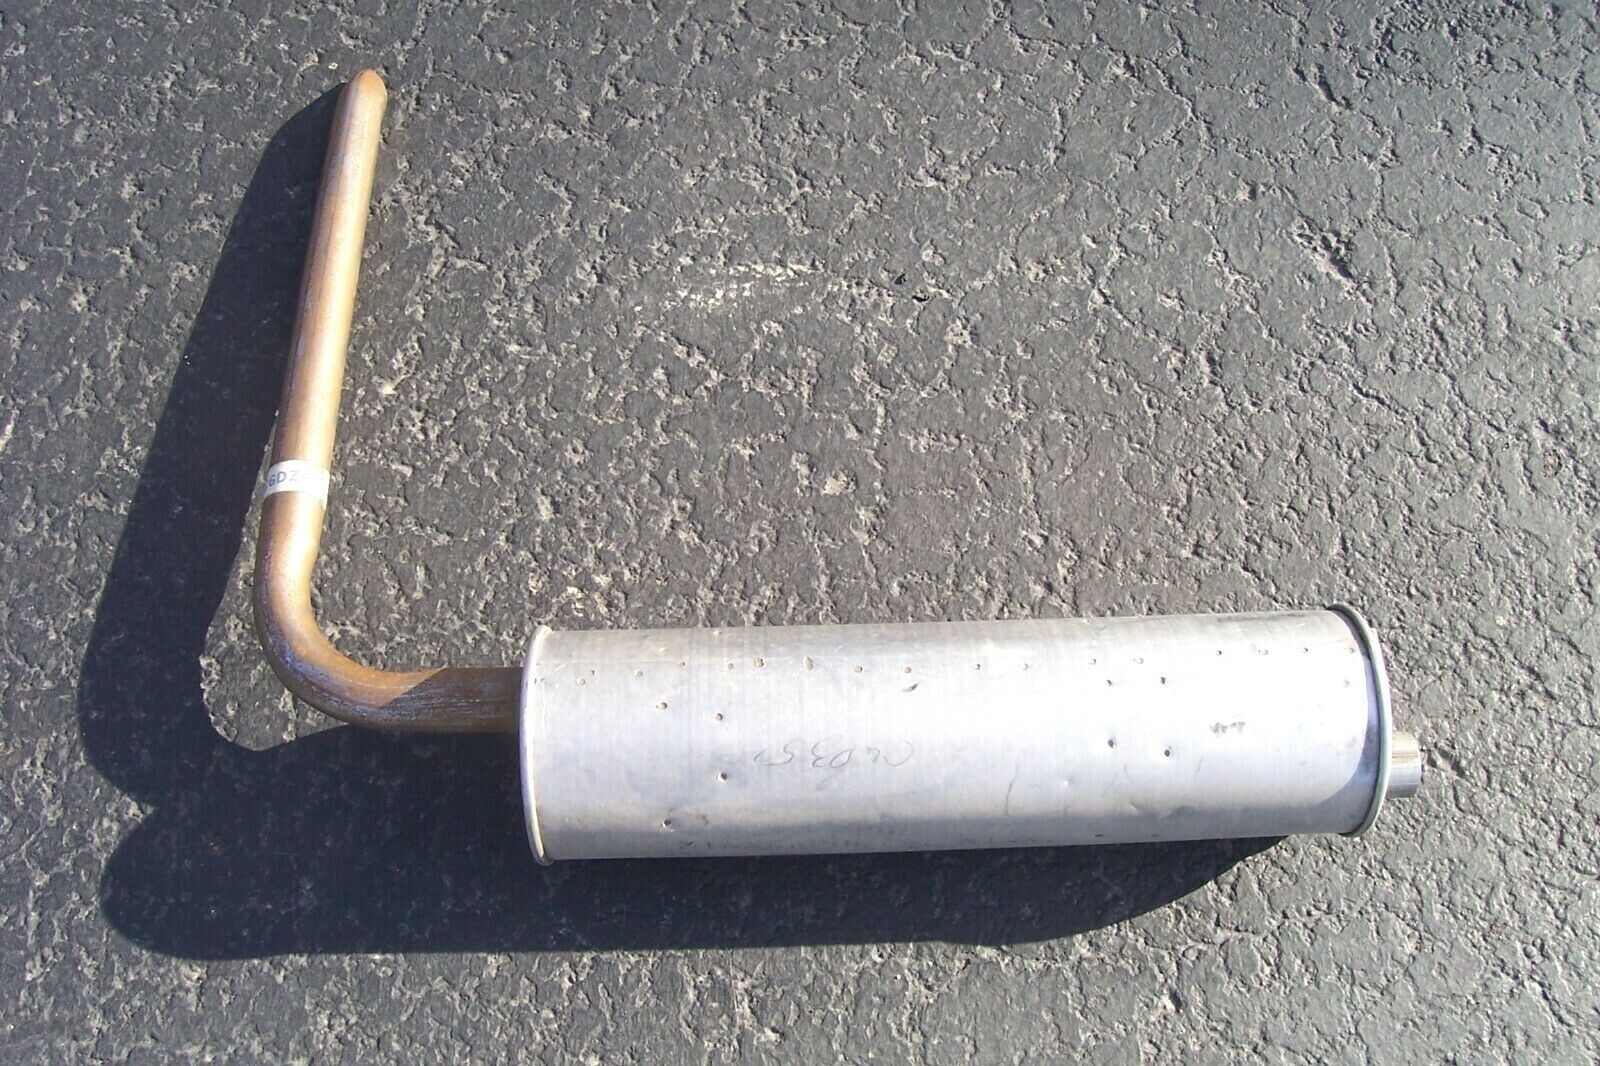 NOS 1966 FORD FALCON 6 CYLINDER SEDAN EXHAUST SYSTEM MUFFLER & TAILPIPE